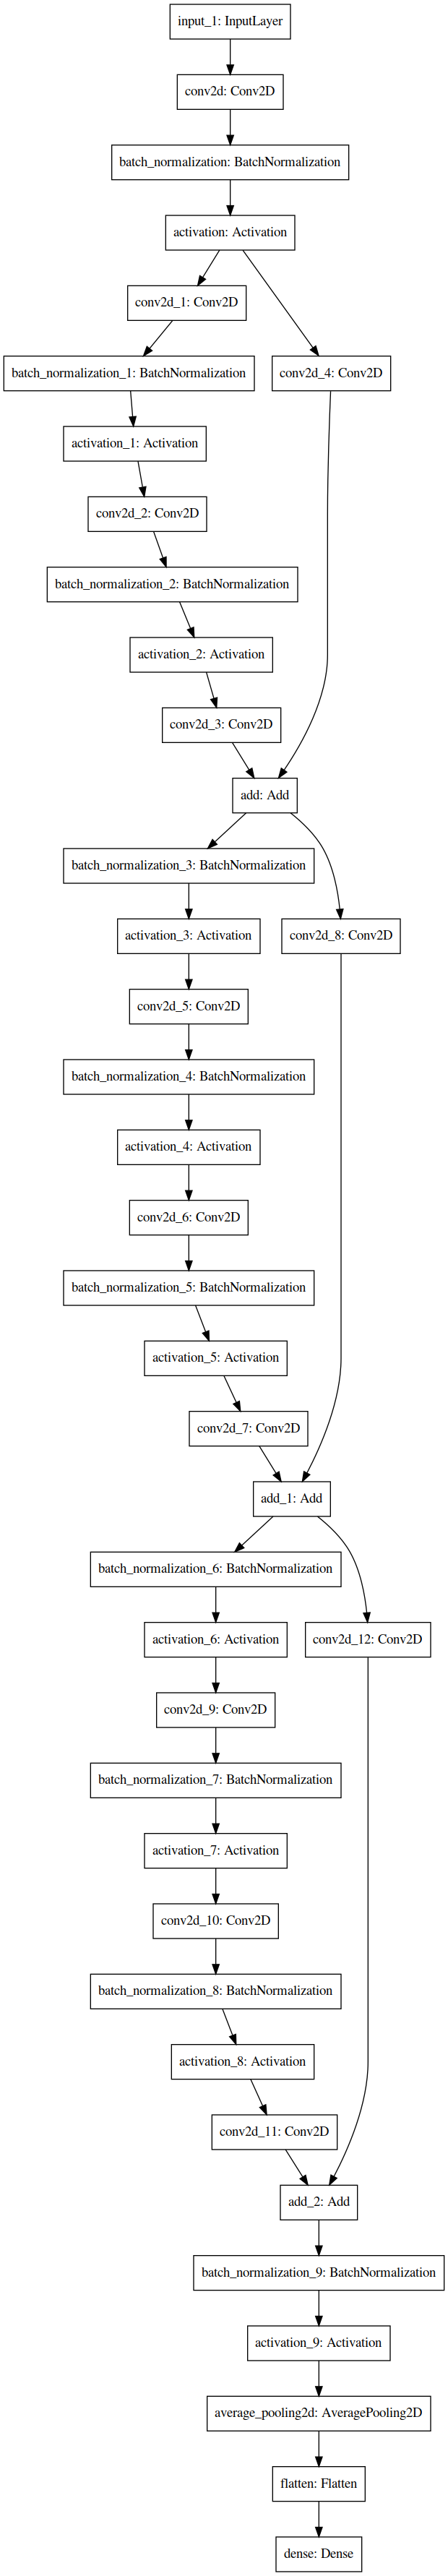 Sample Model architecture with depth 11